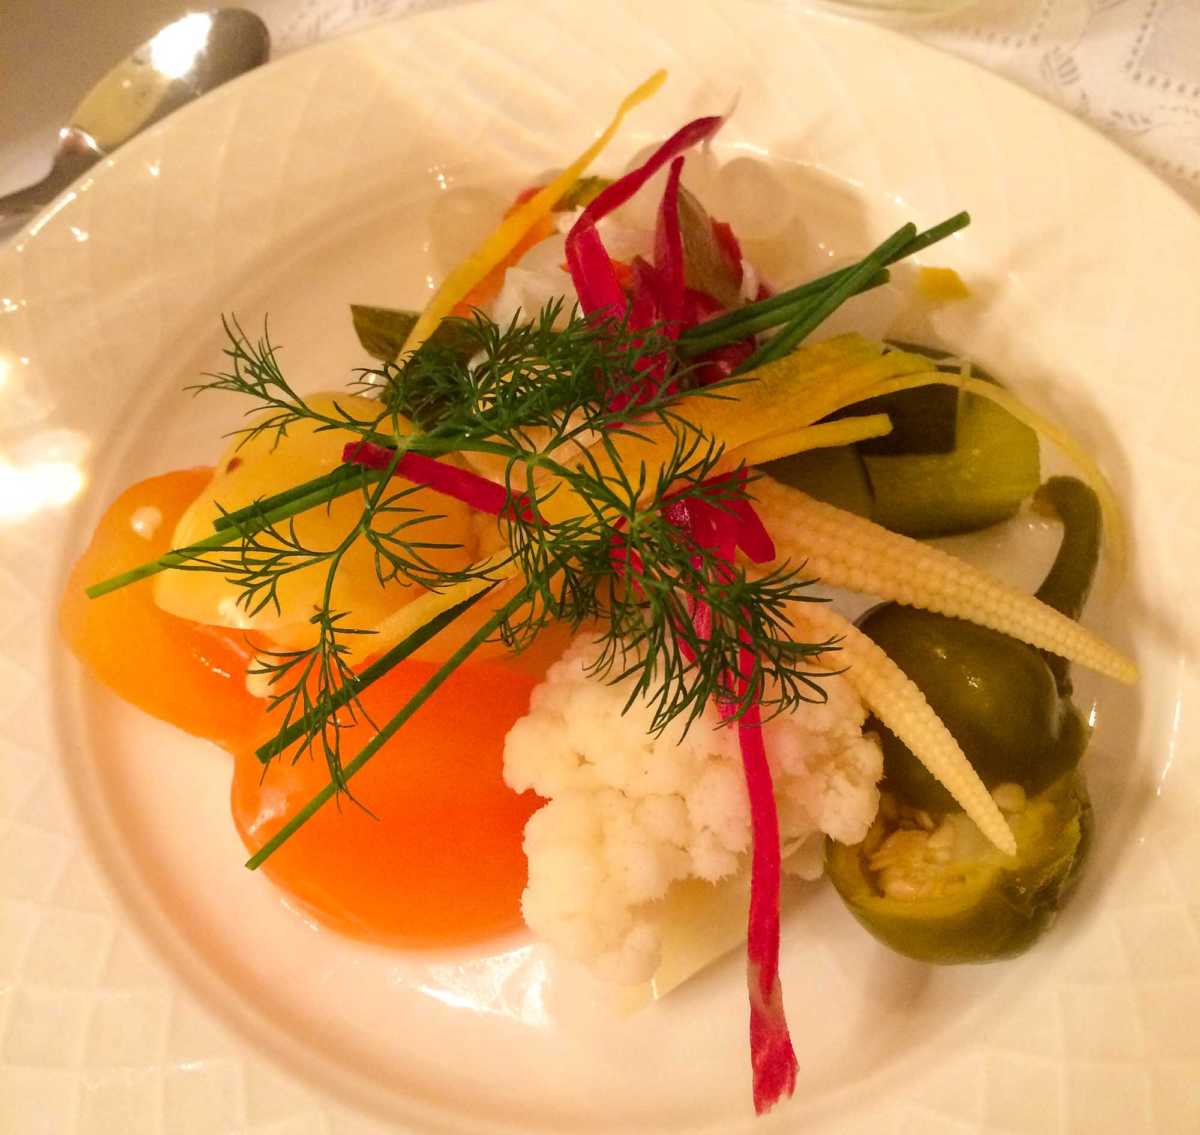 Pickled vegetable salad is perfect with rich, classic Hungarian dishes